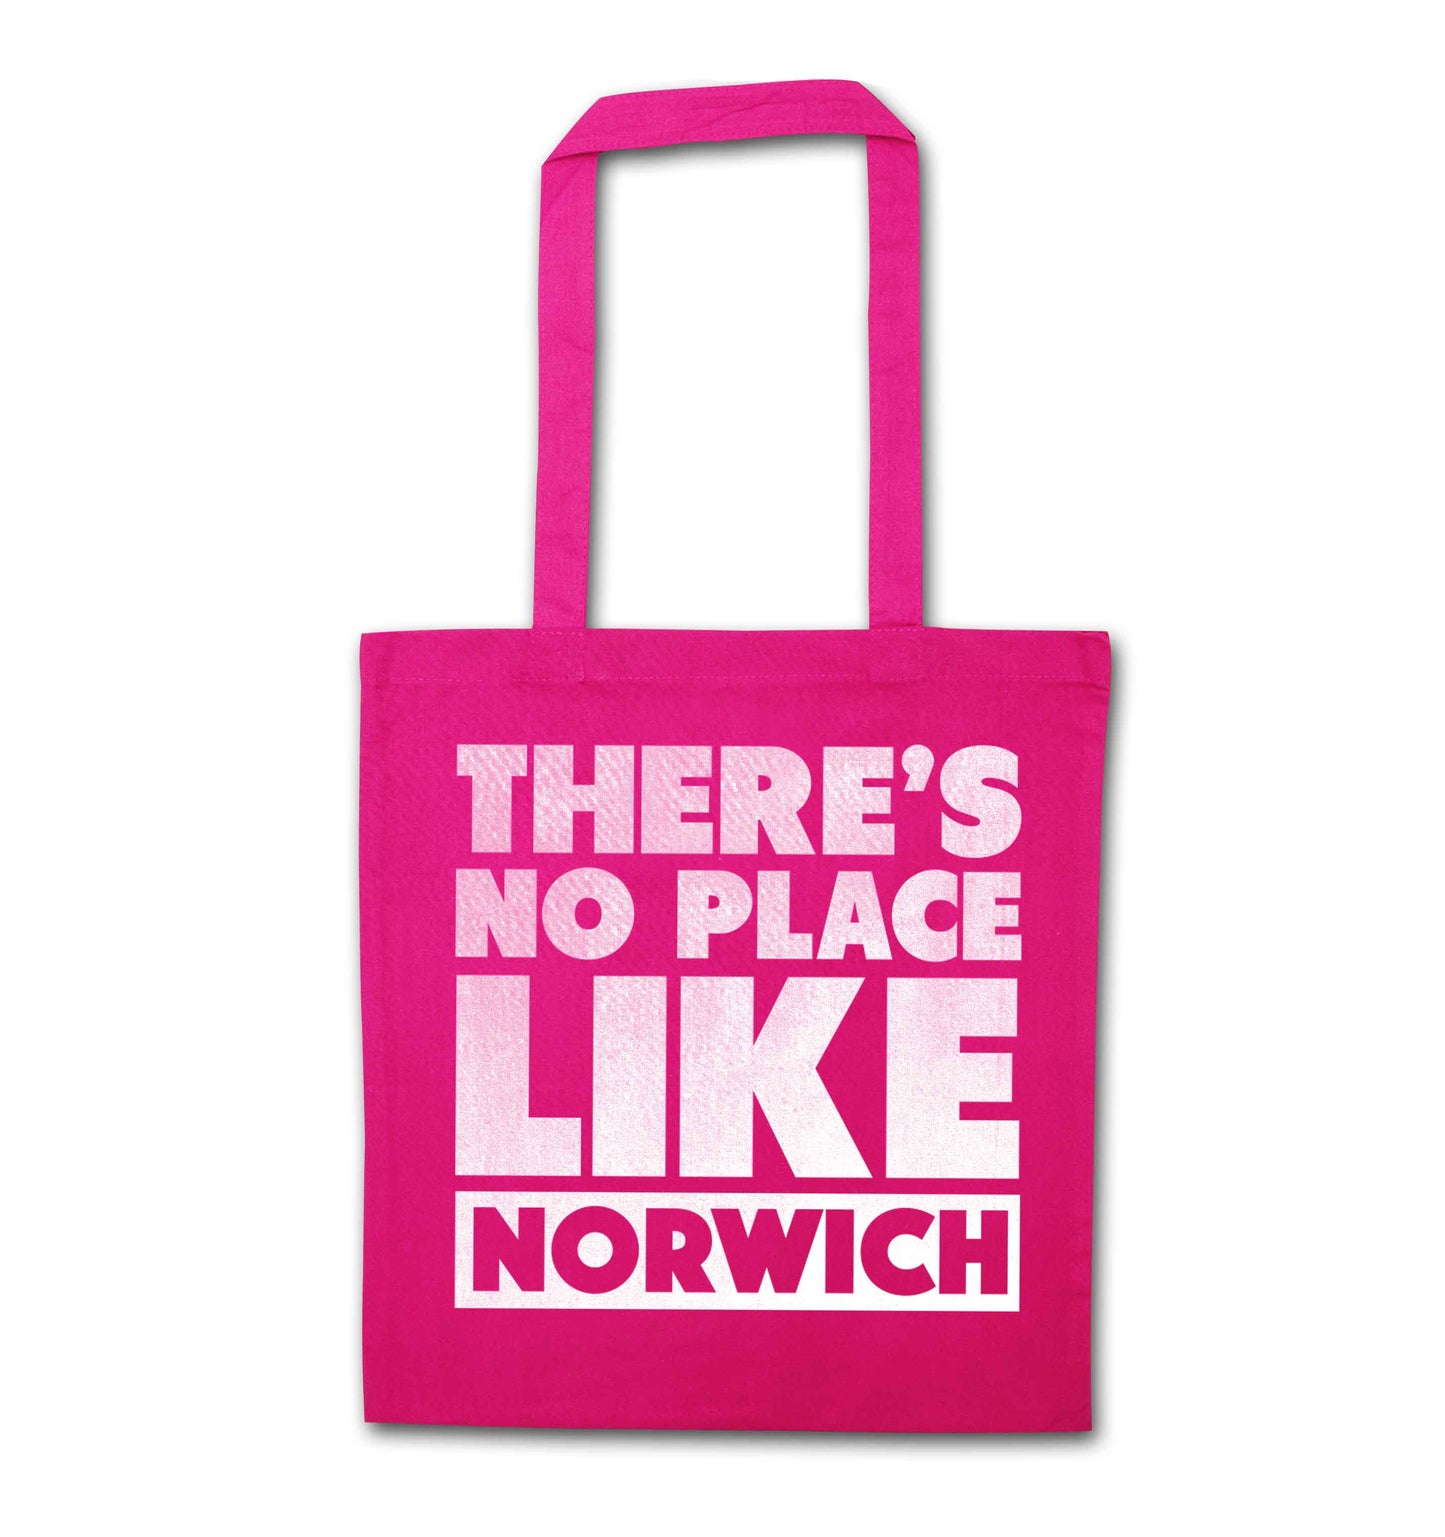 There's no place like Norwich pink tote bag